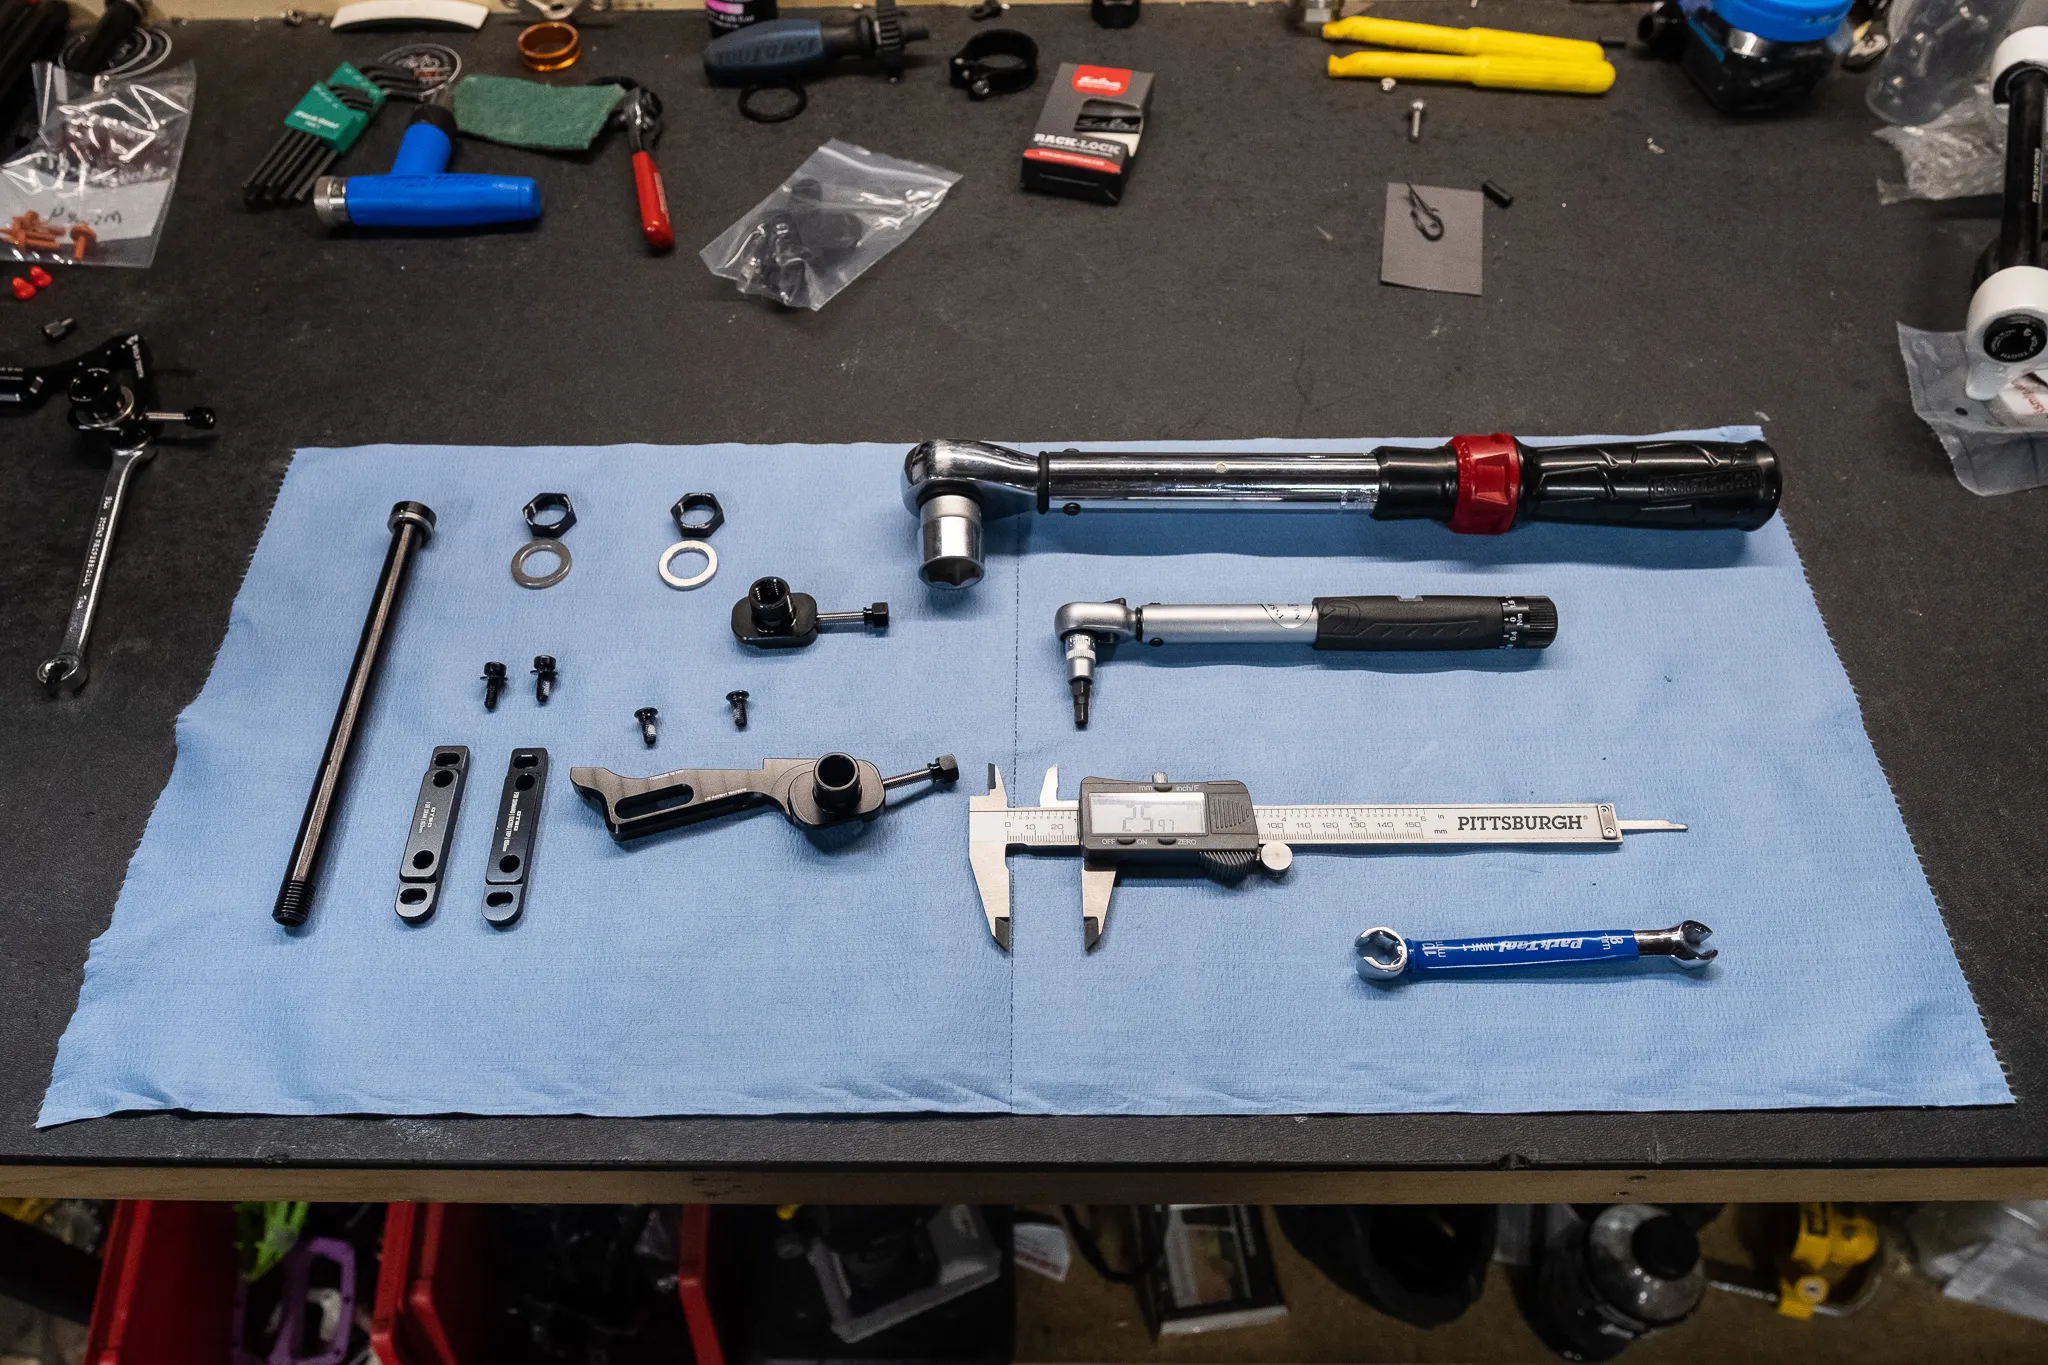 A workshop table showing the tools needed to install the Otso Cycles Single Speed Tuning Chip Conversion Kit on an Otso Cycles Warakin Stainless or Warakin Ti bicycle.